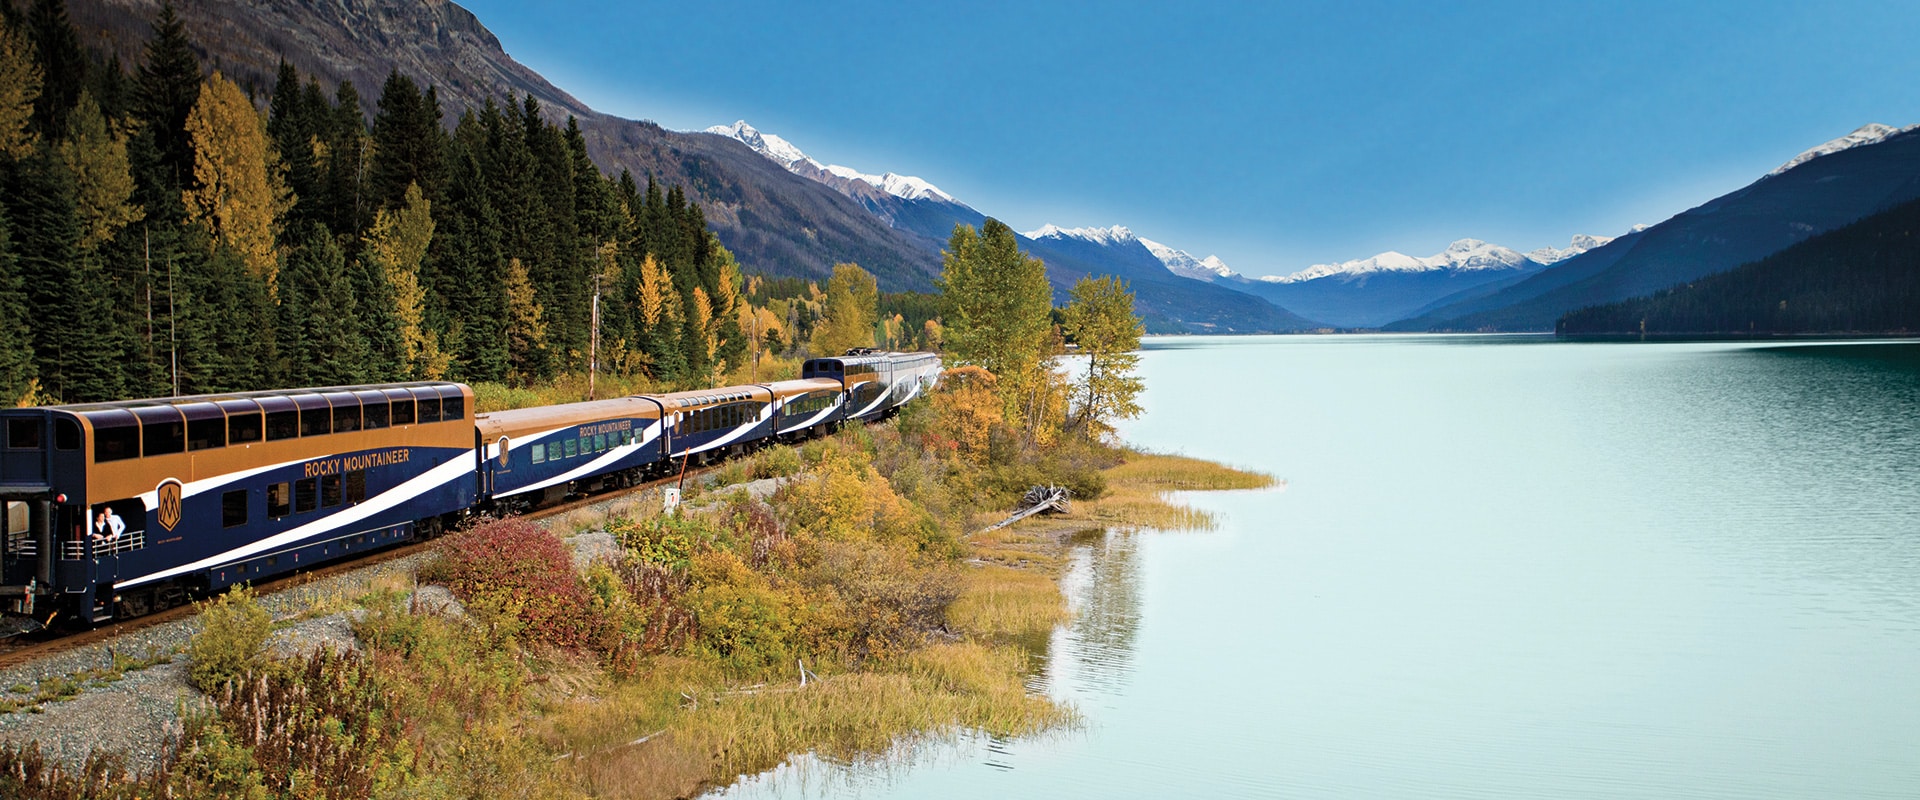 Indulge in beautiful scenery aboard the Rocky Mountaineer with APT.